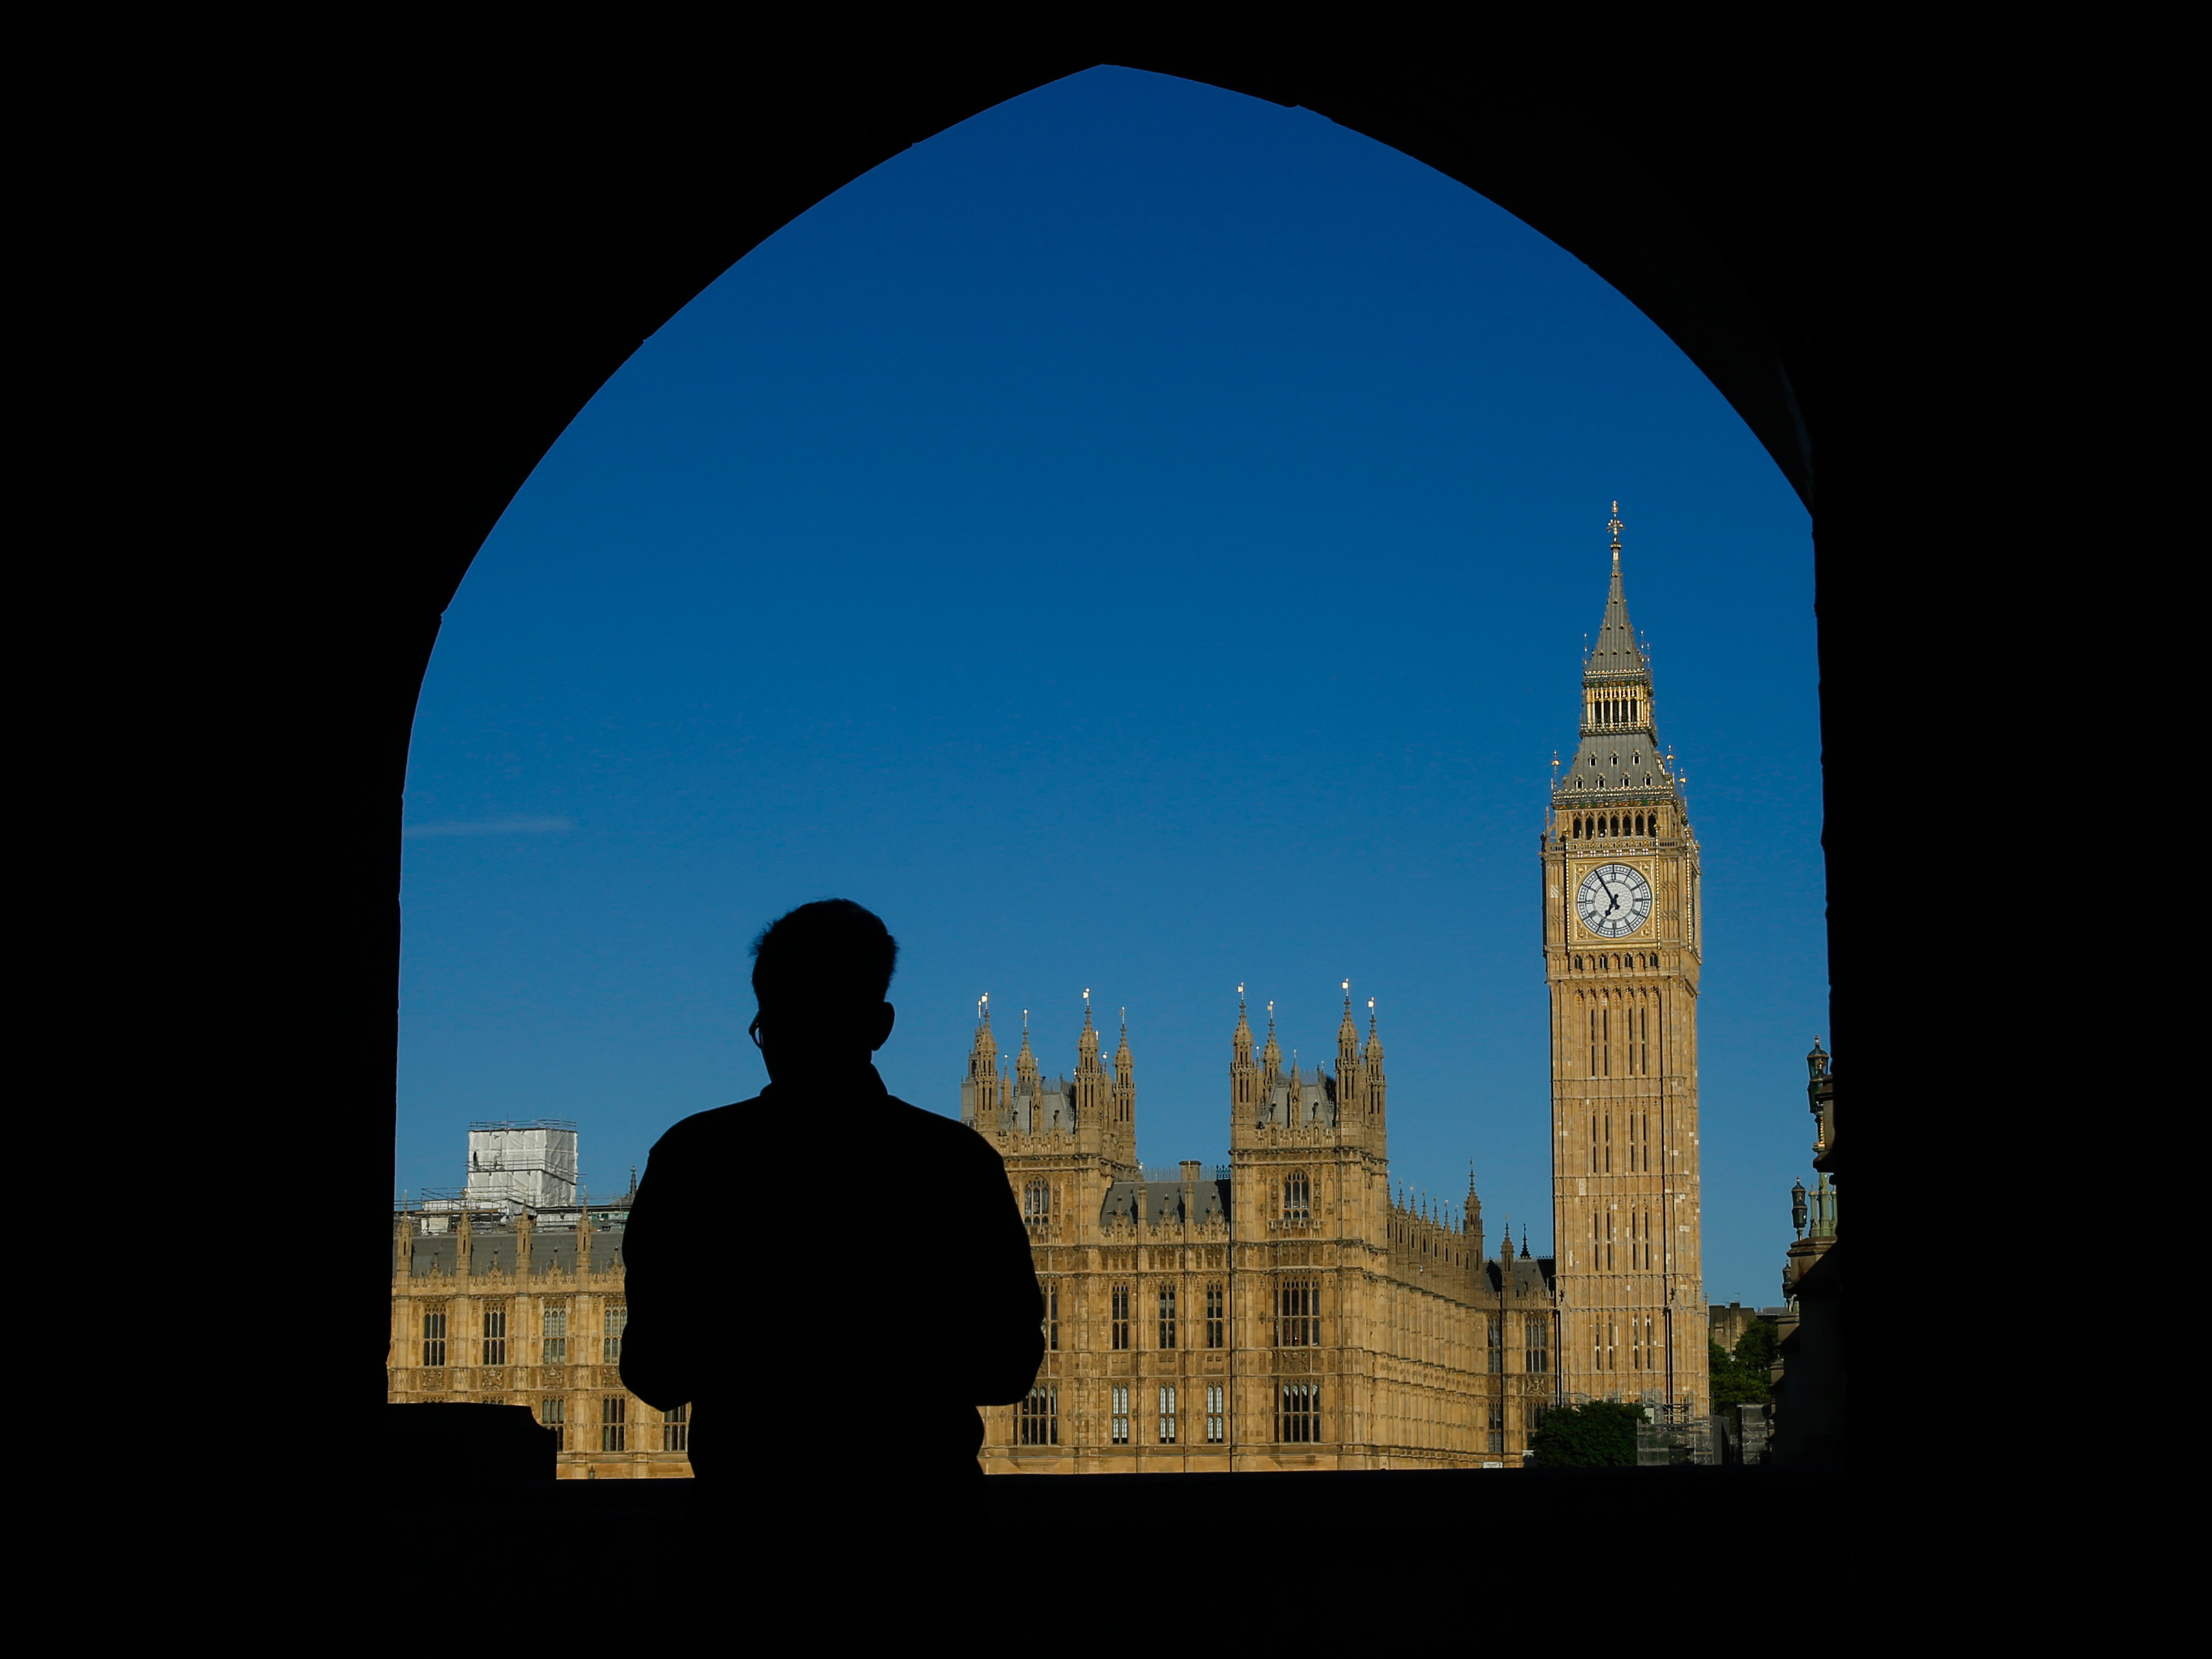 The Palace of Westminster, the meeting place of the Houses of Parliament, in London. Photo: Bloomberg